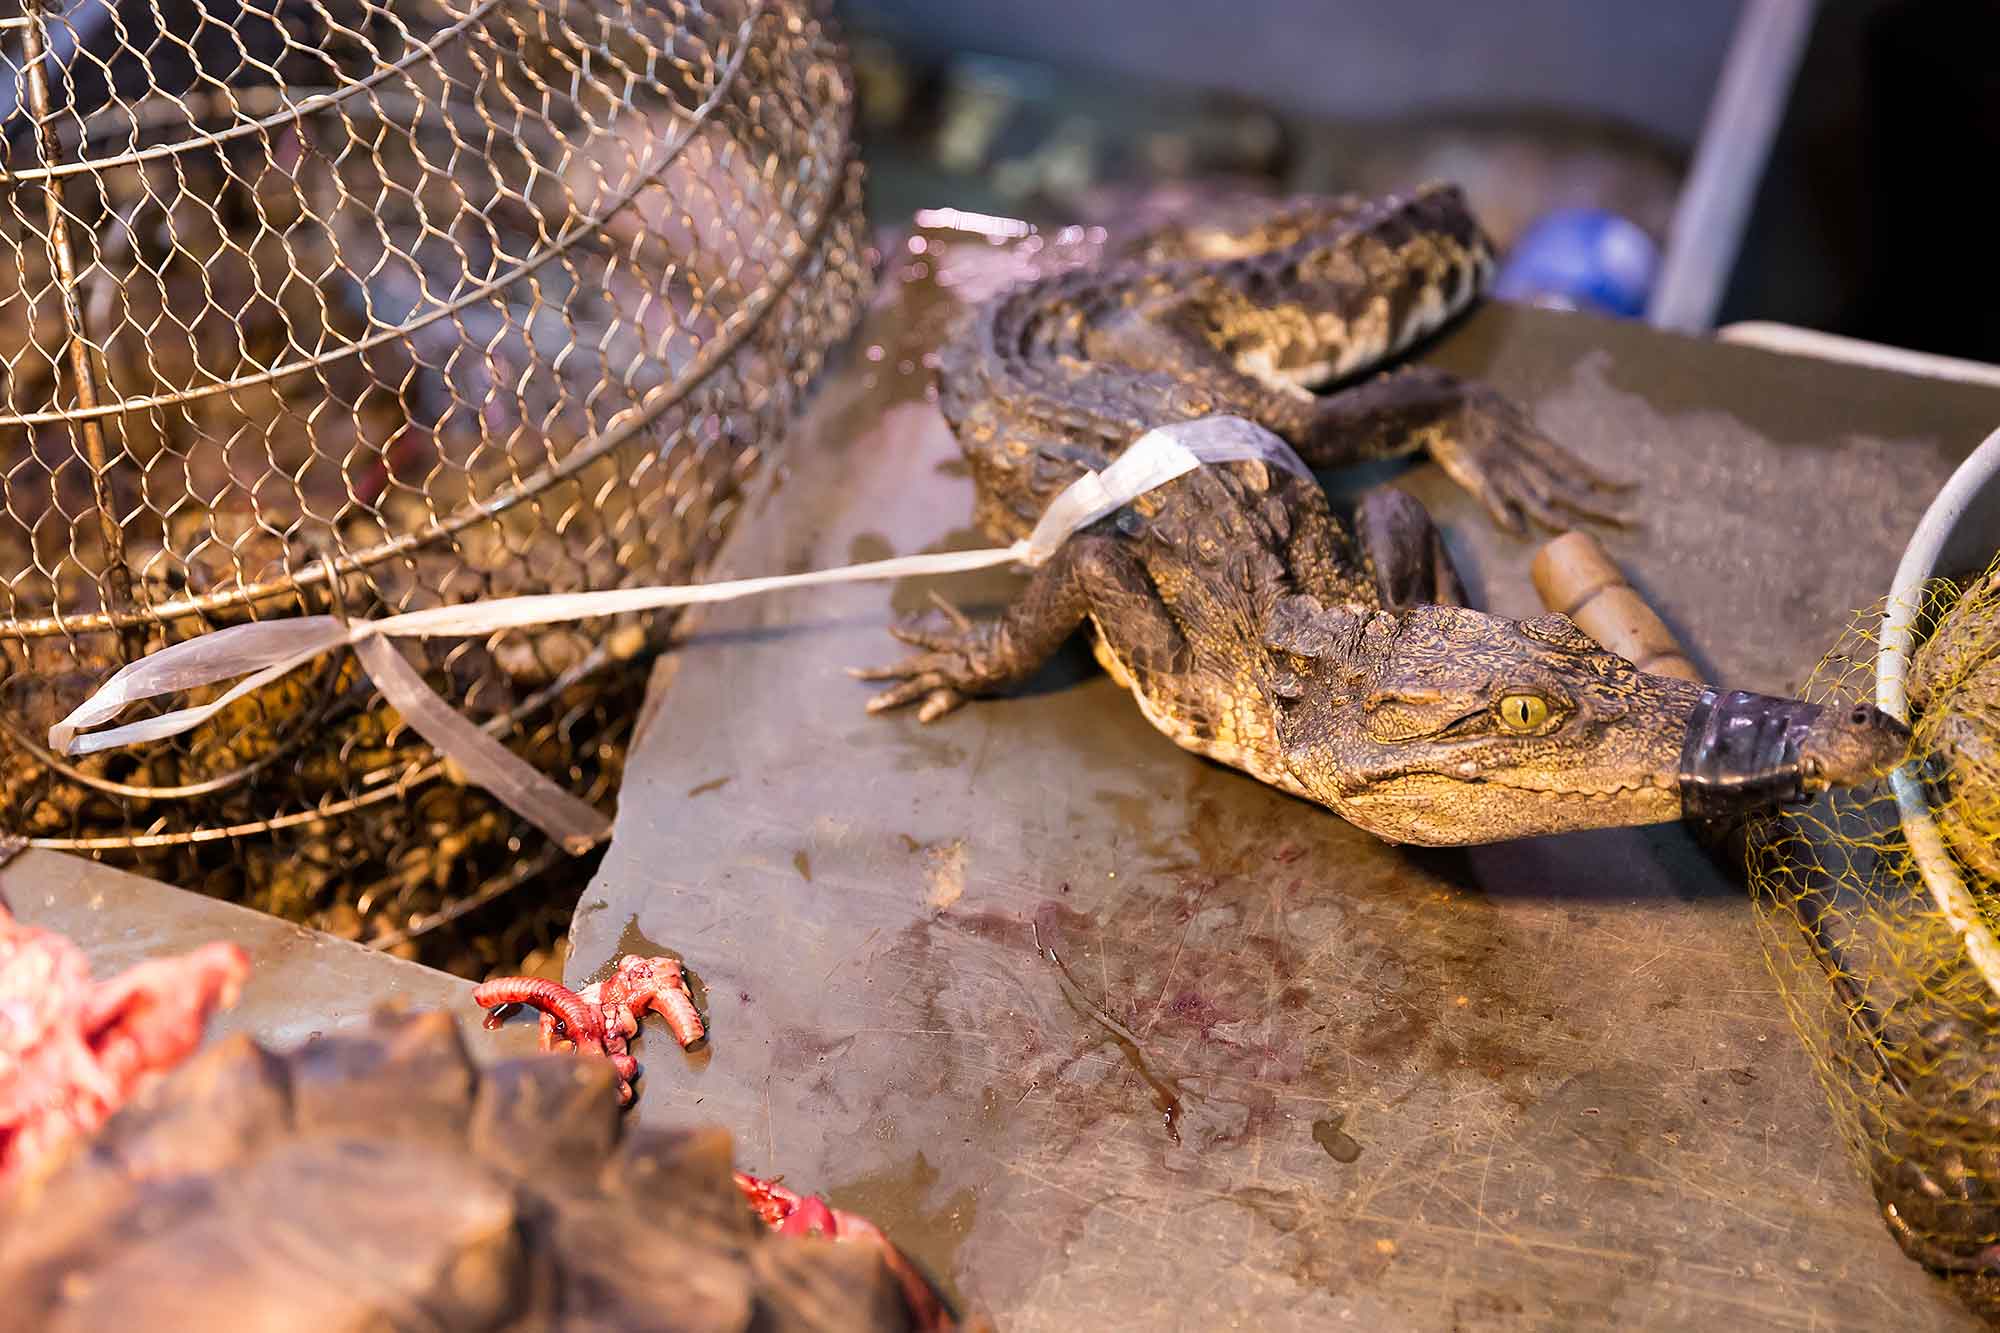 A living crocodile at a market in Guangzhou. © Ulli Maier & Nisa Maier